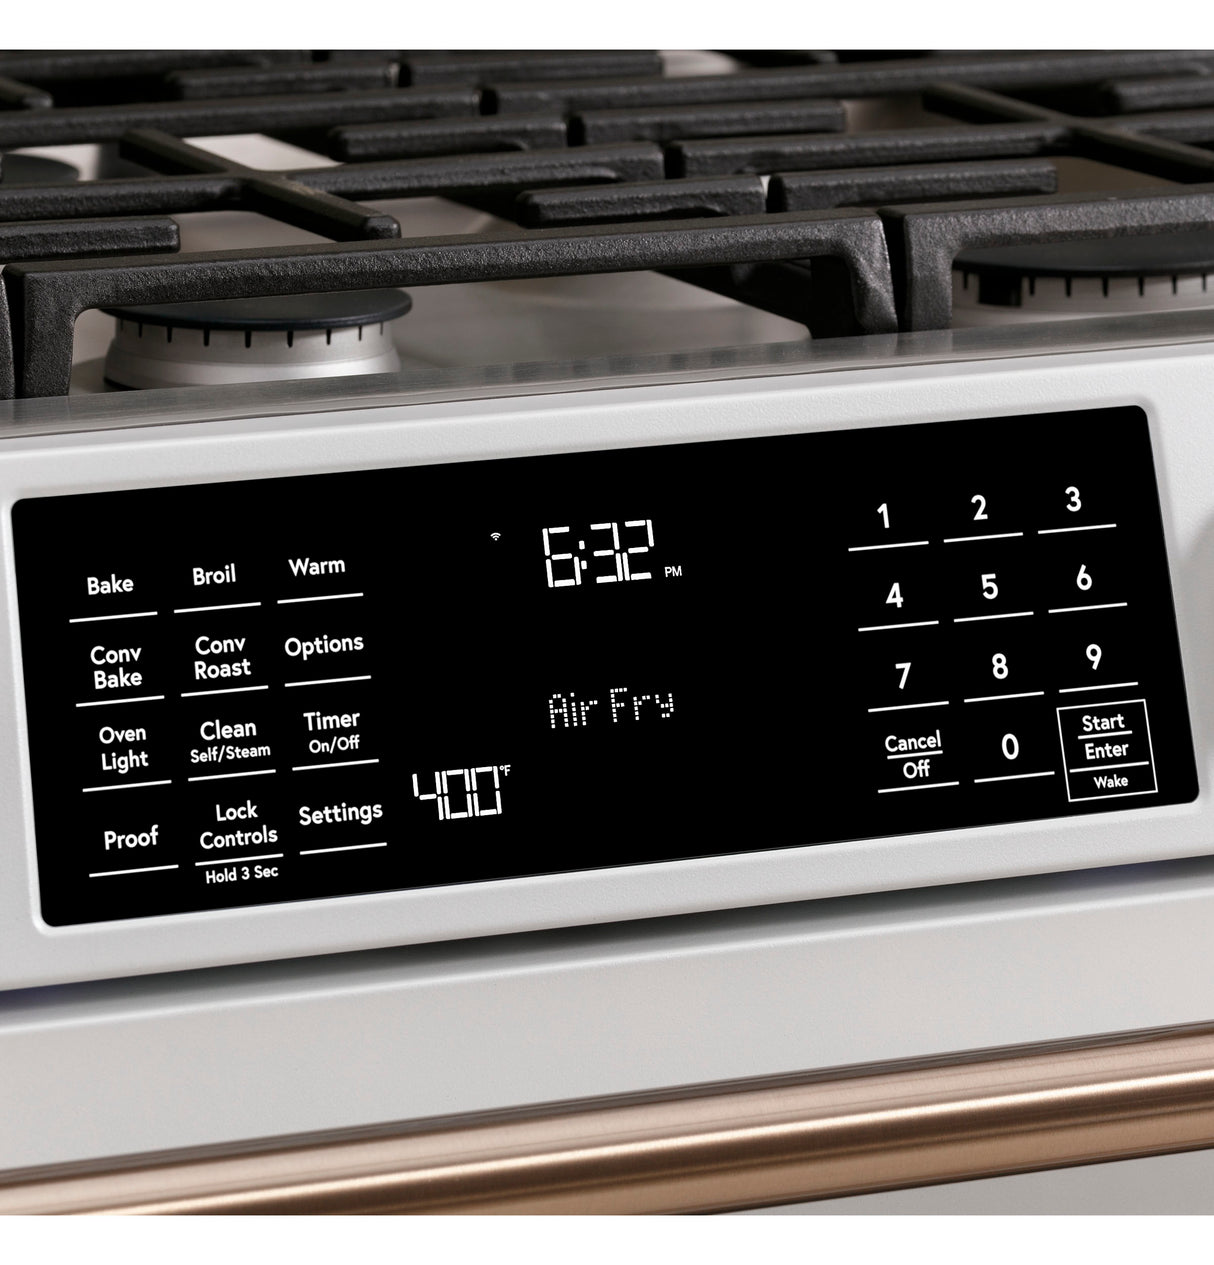 Caf(eback)(TM) 30" Smart Slide-In, Front-Control, Gas Range with Convection Oven - (CGS700P2MS1)